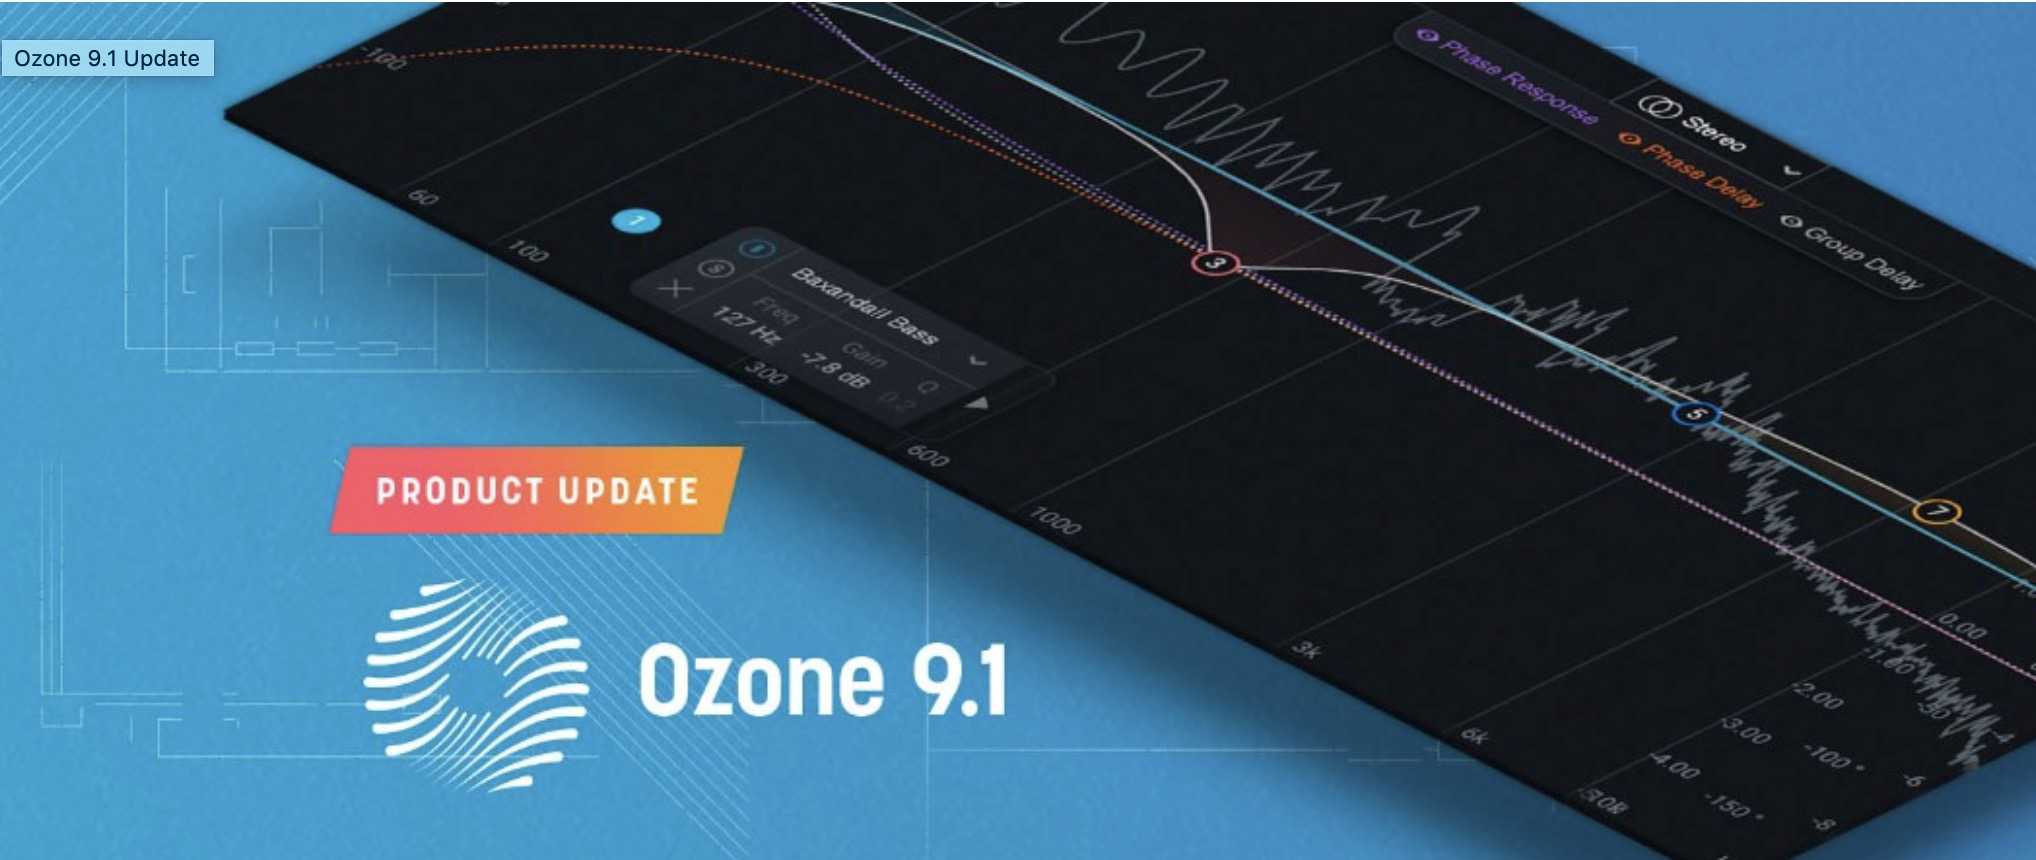 Ozone 9.1 Update Available